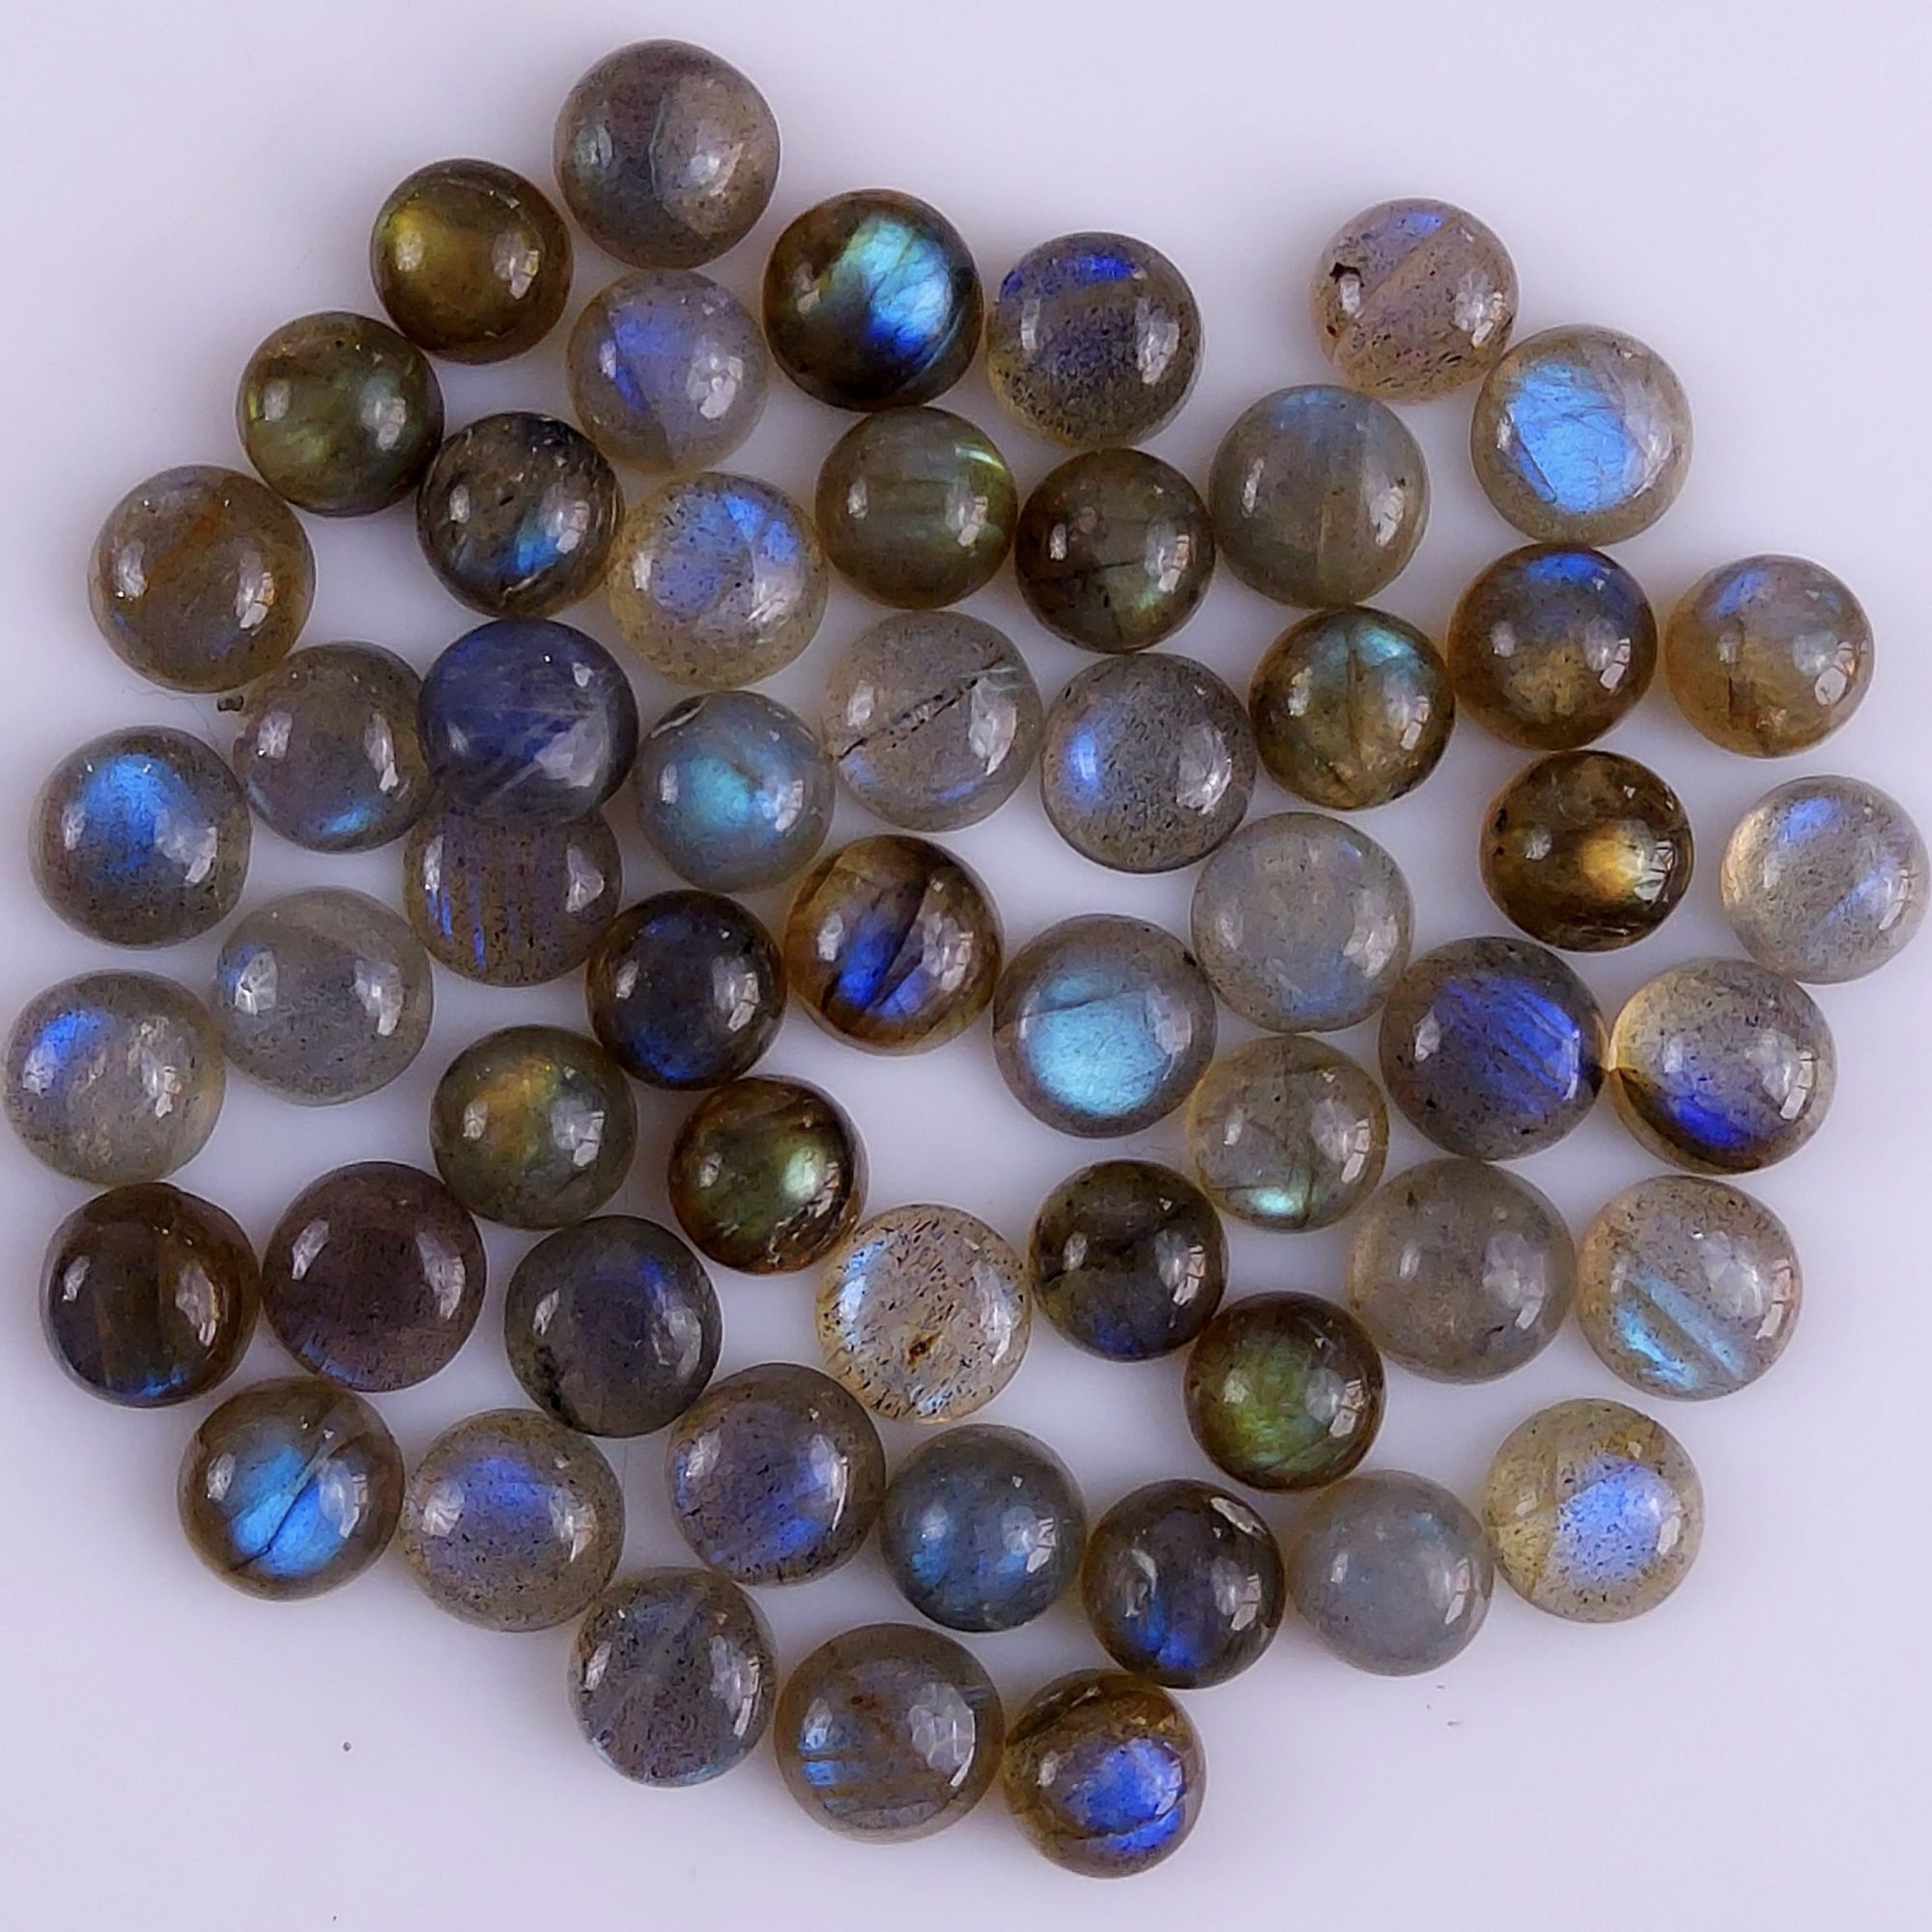 55Pcs 105Cts Natural Blue Labradorite Calibrated Cabochon Round Shape Gemstone Lot For Jewelry Making 5x5mm#734